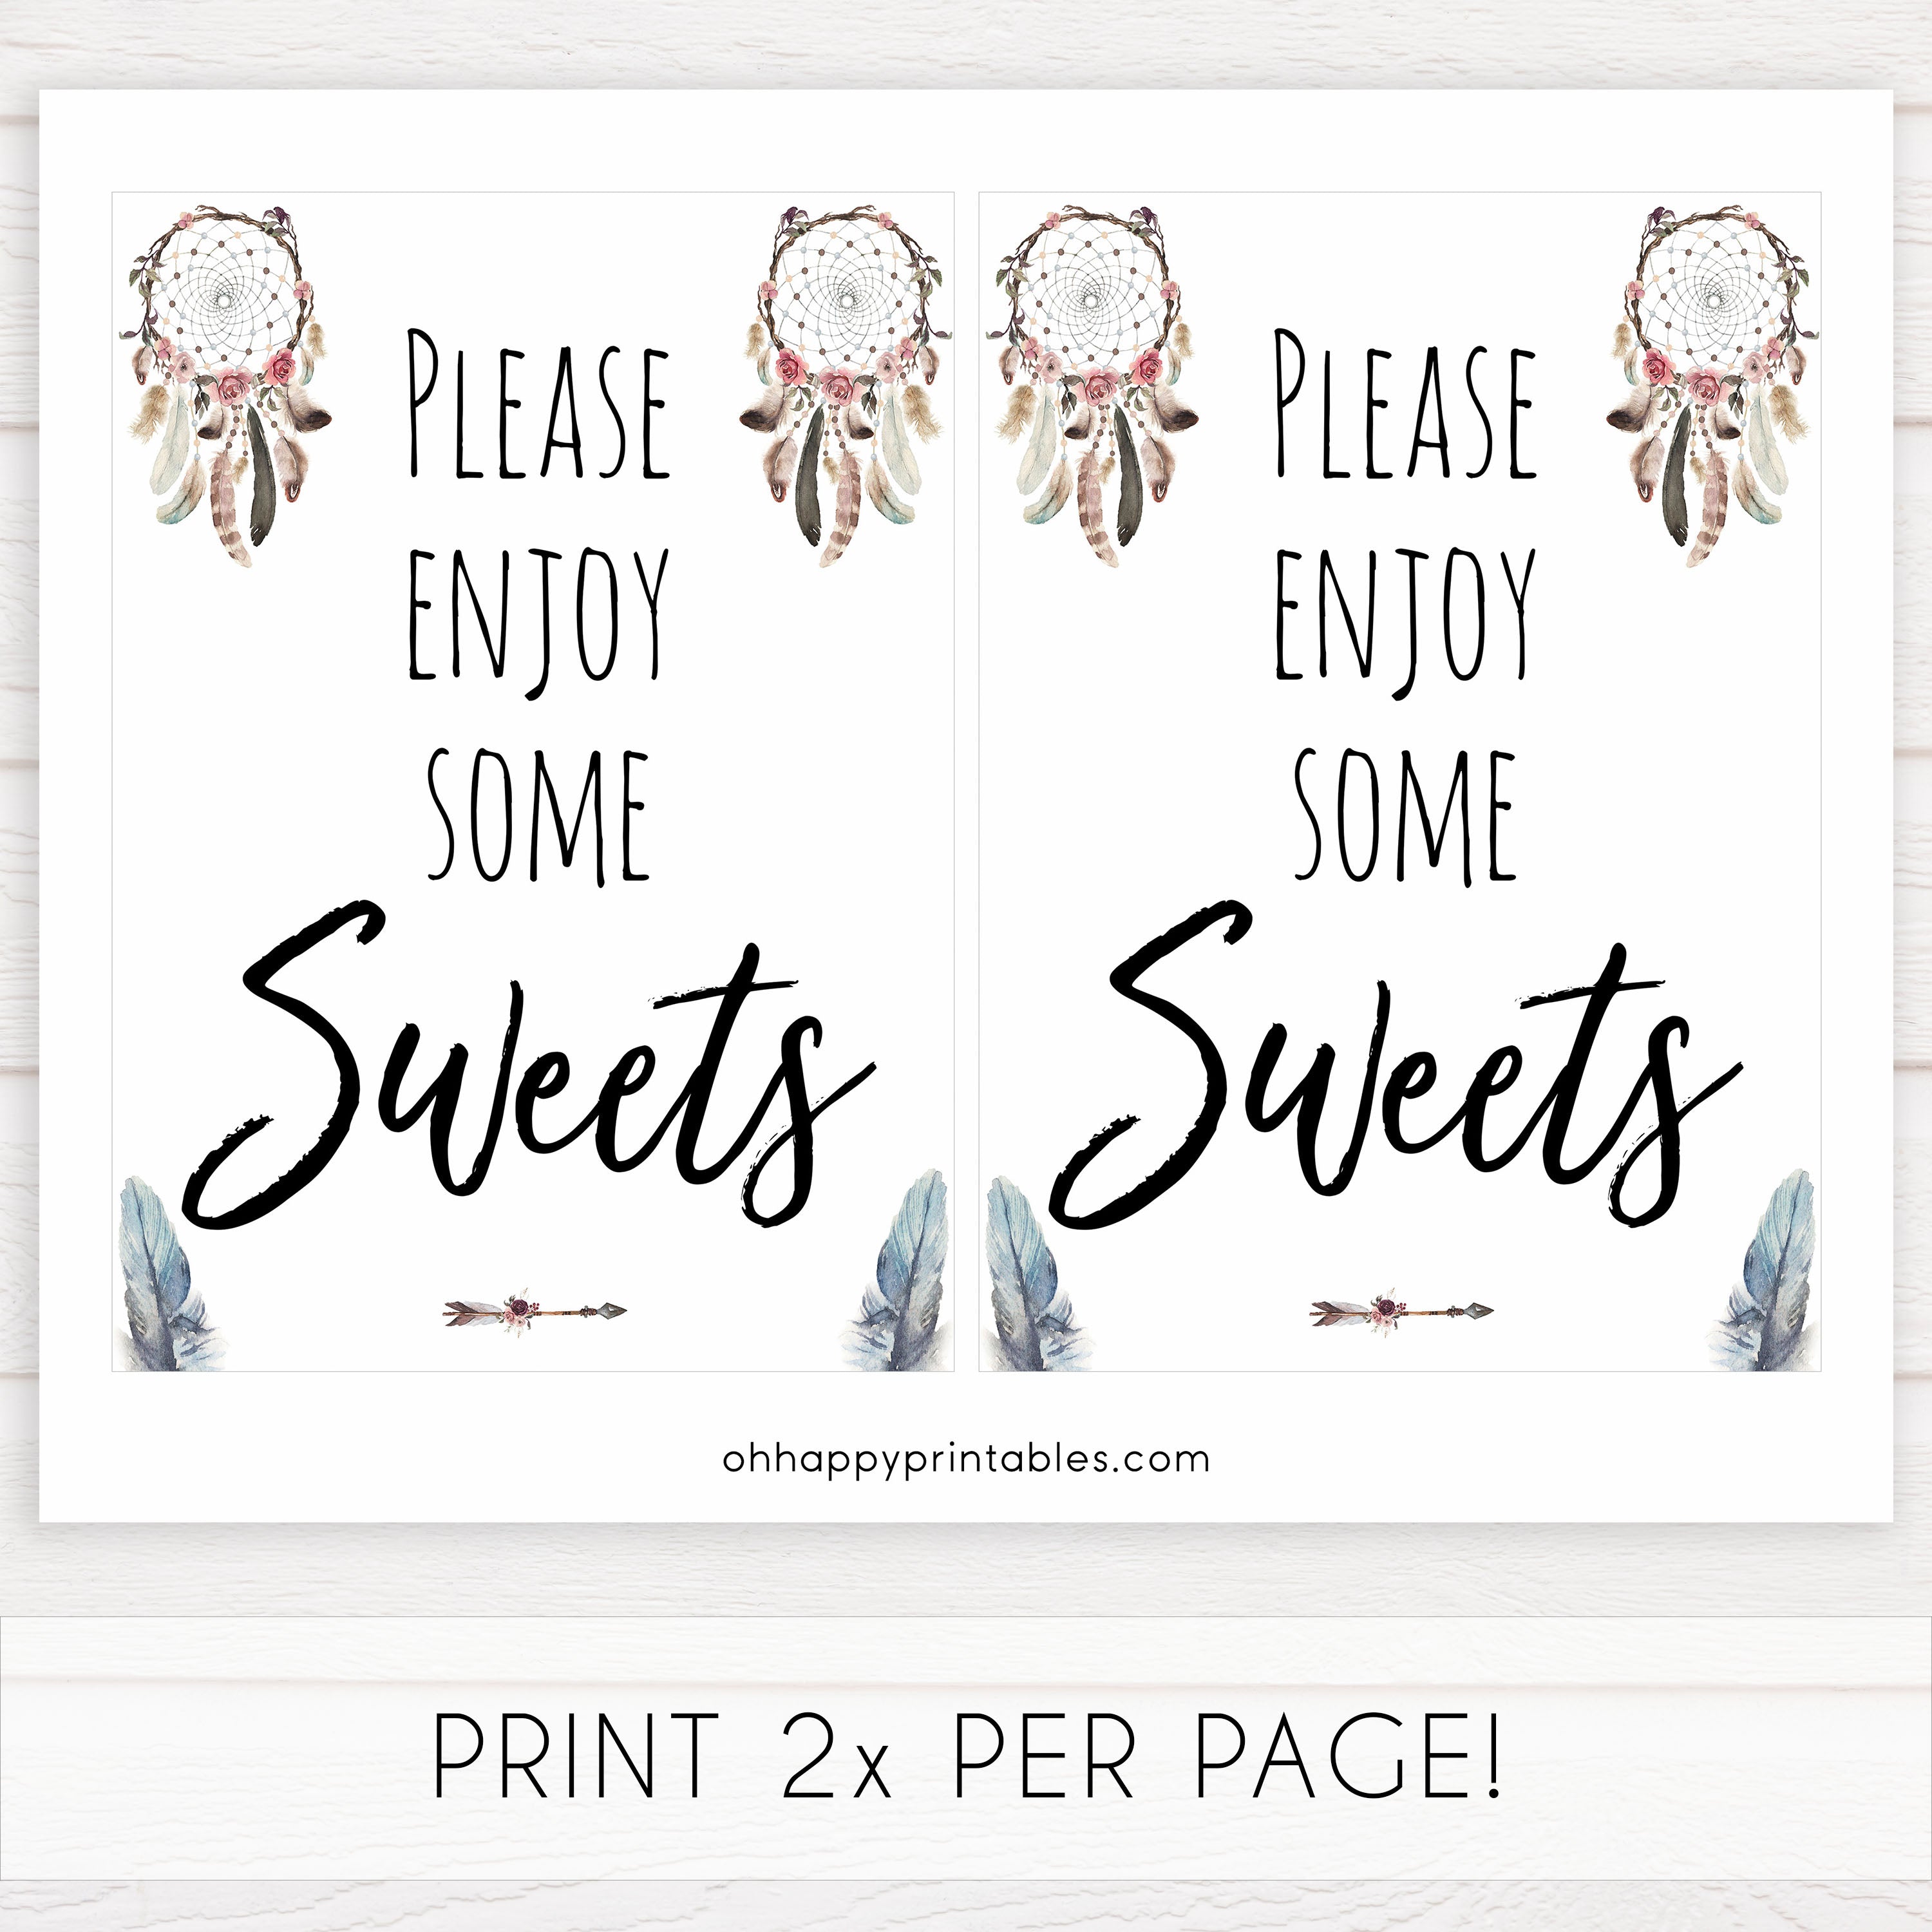 boho baby signs, sweets baby signs, printable baby signs, boho baby decor, fun baby signs, baby shower signs, baby shower decor